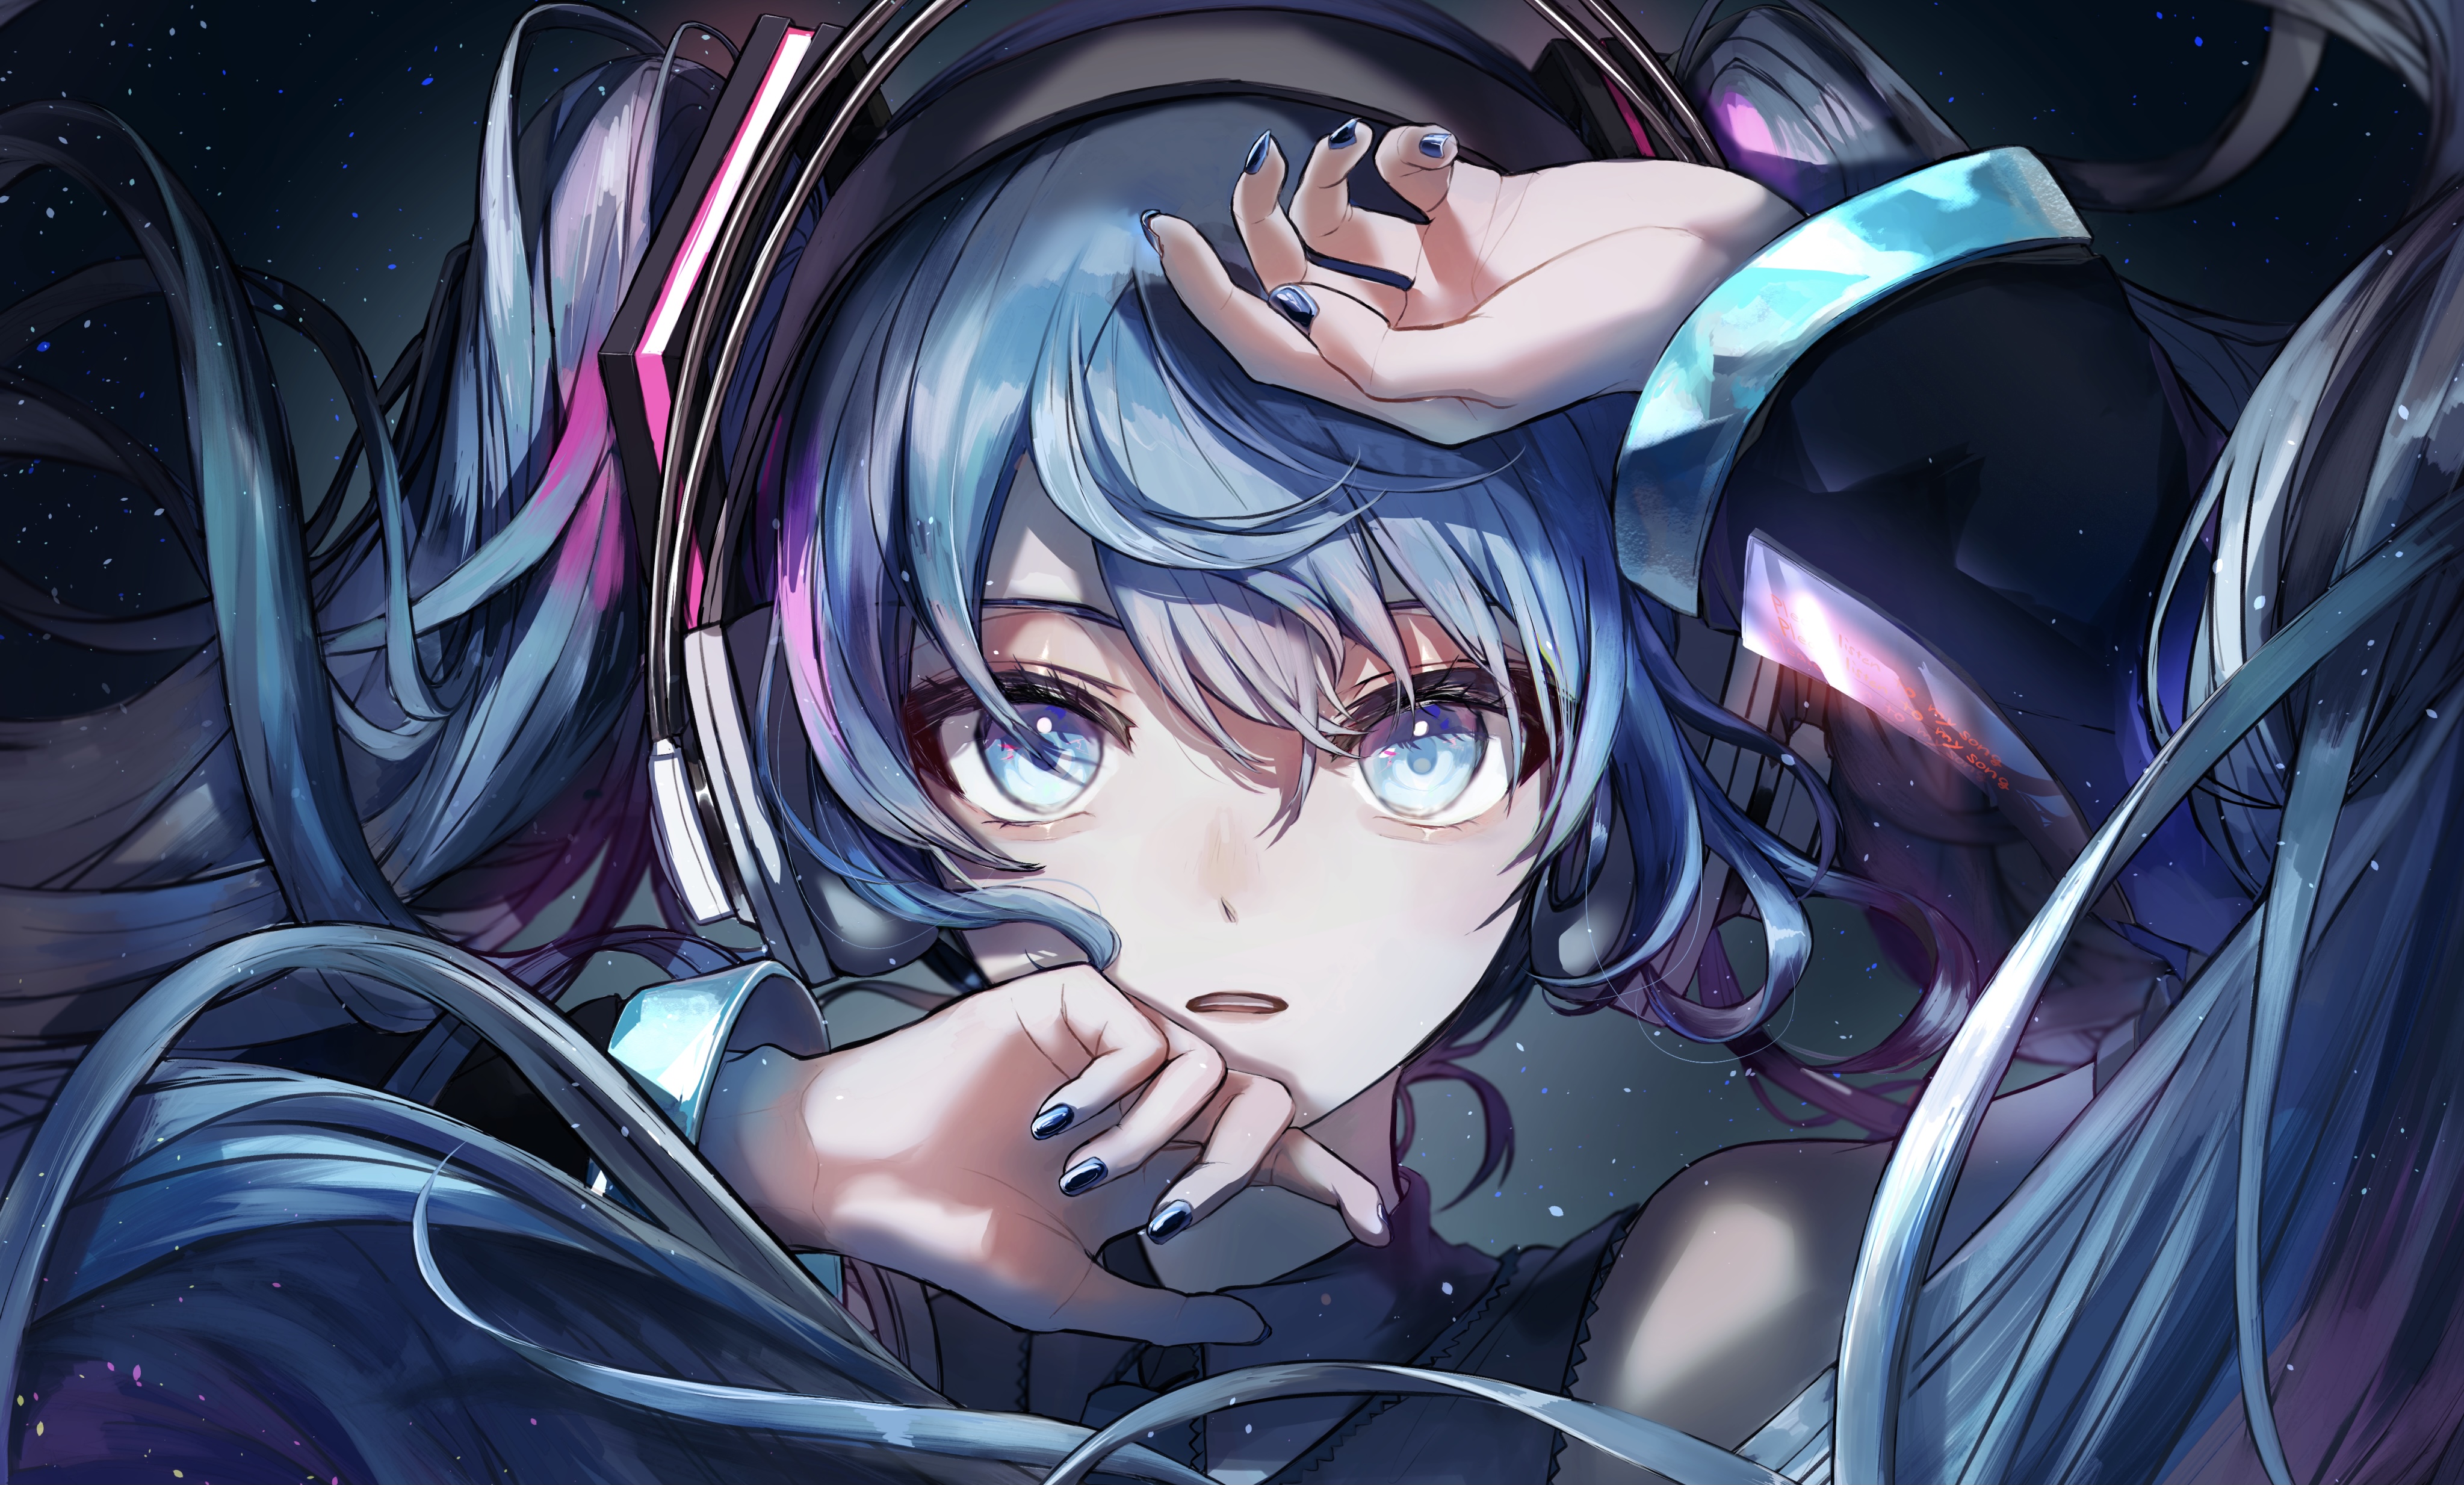 Anime Anime Girls Face Blue Eyes Blue Nails Blue Hair Closeup Women Painted Nails Hair In Face Vocal 4094x2467